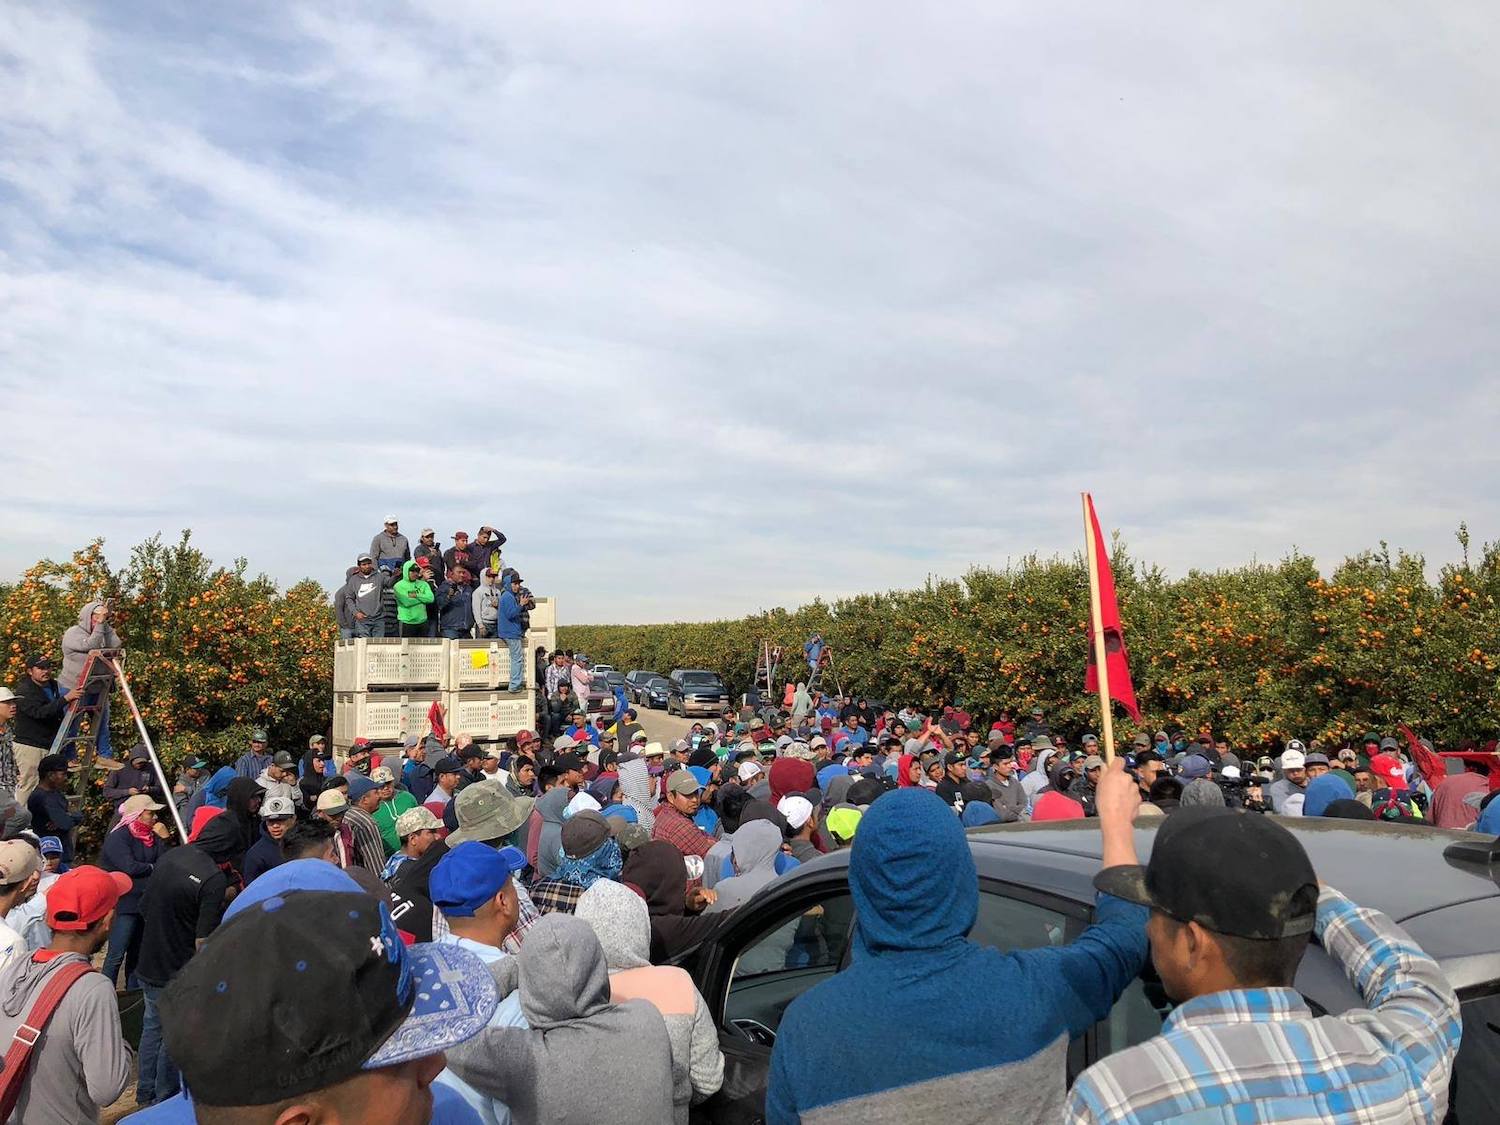 Orange pickers are back on the job after Wonderful company restores pay rate after four-day strike. Credit: United Farm Workers of America, January 2019